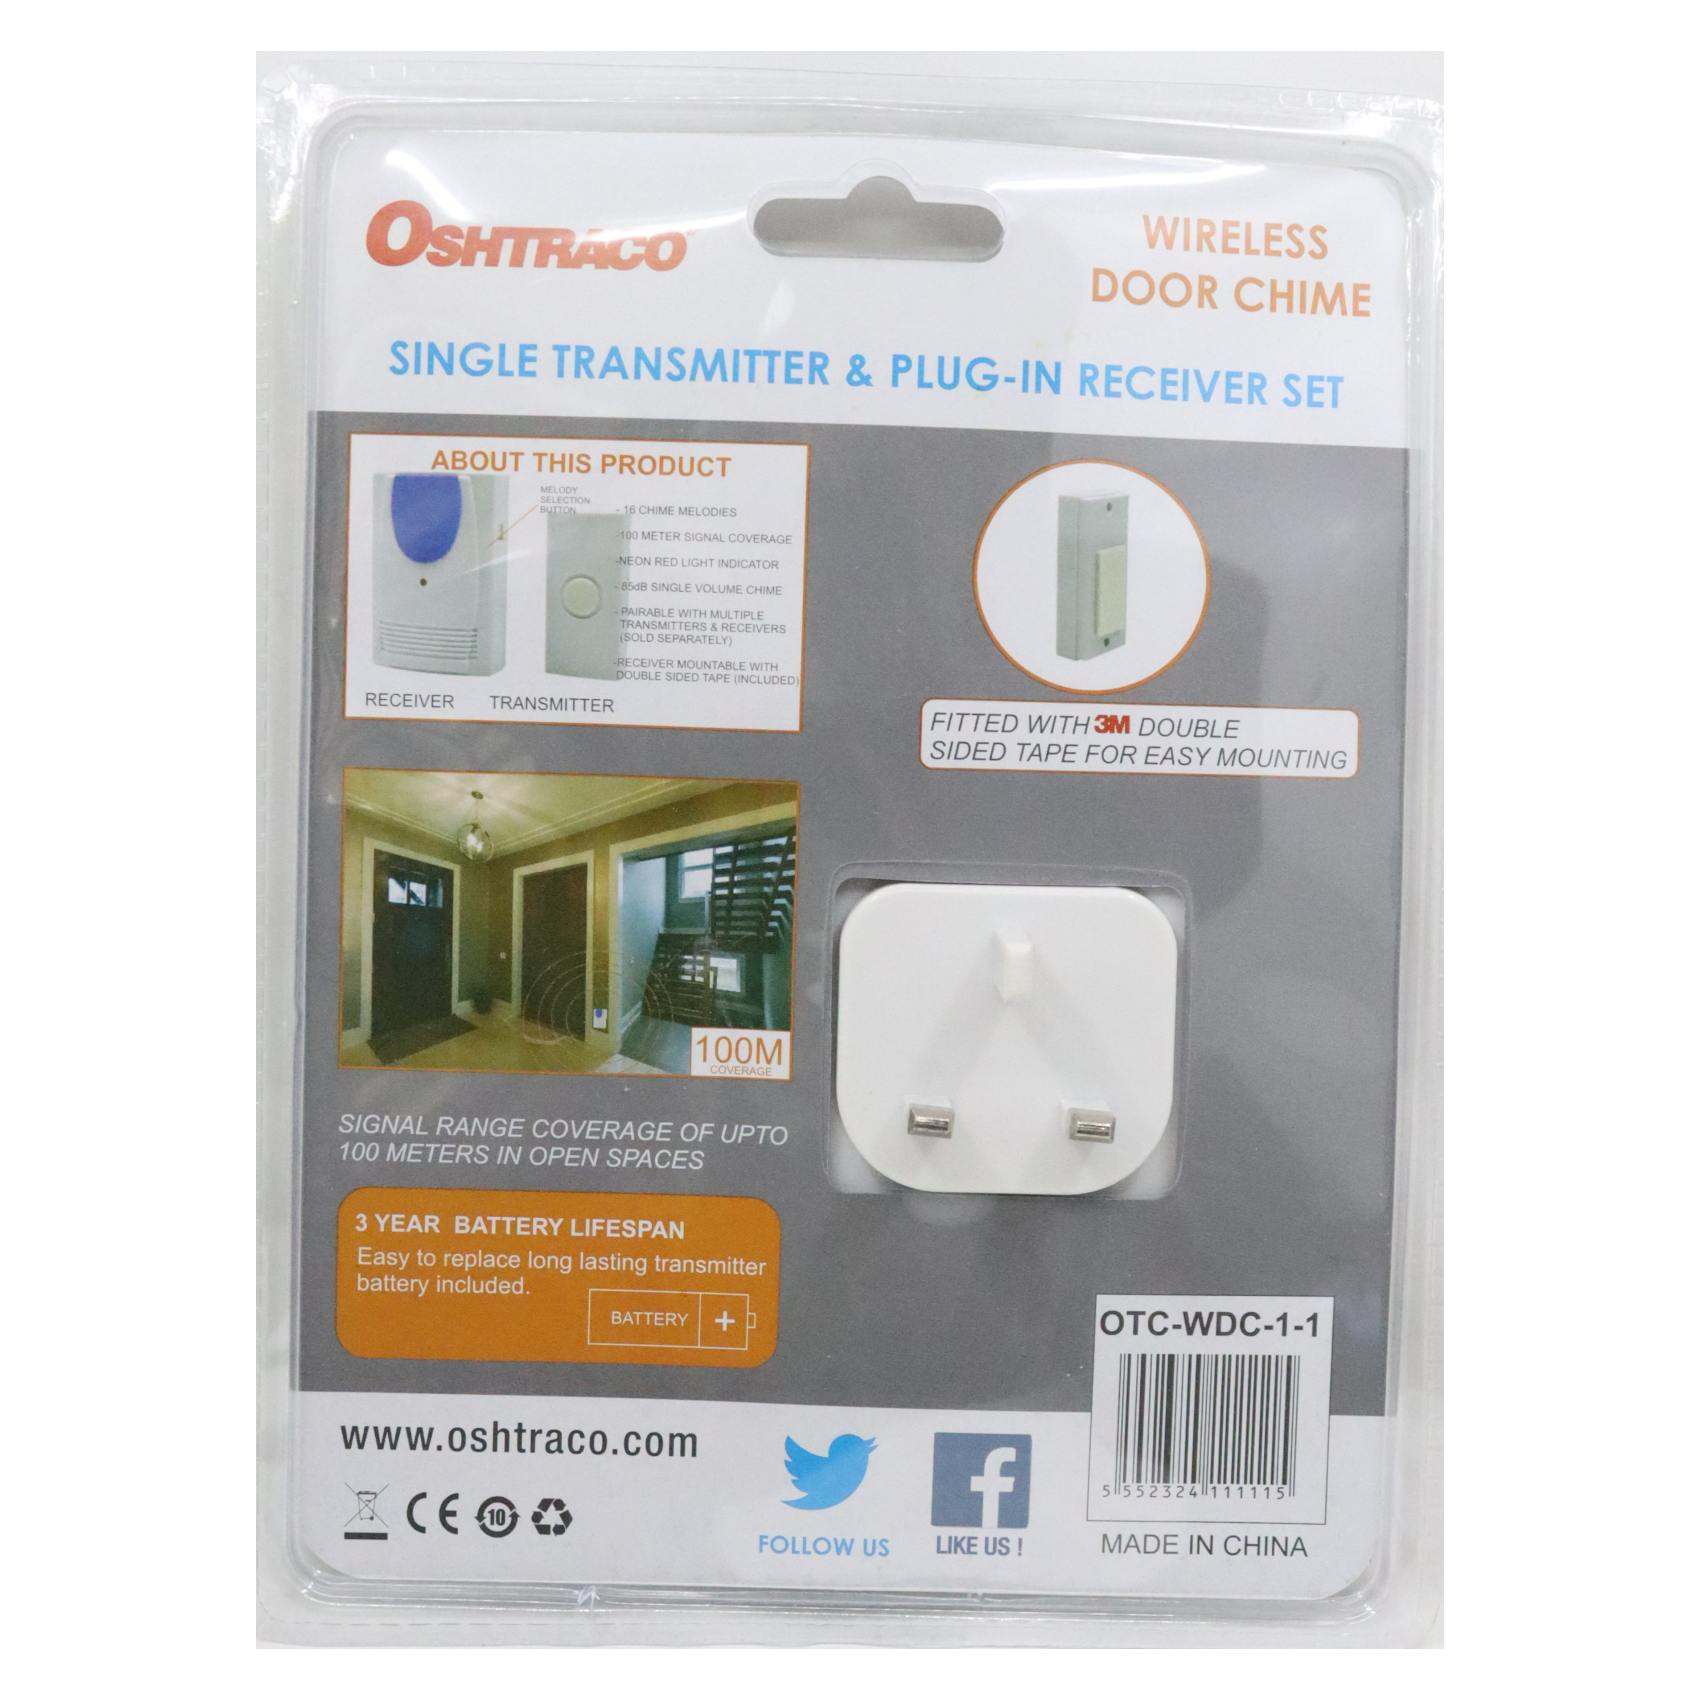 Oshtraco Single Transmitter And Plug-in Receiver Set Wireless Door Chime With Batteries